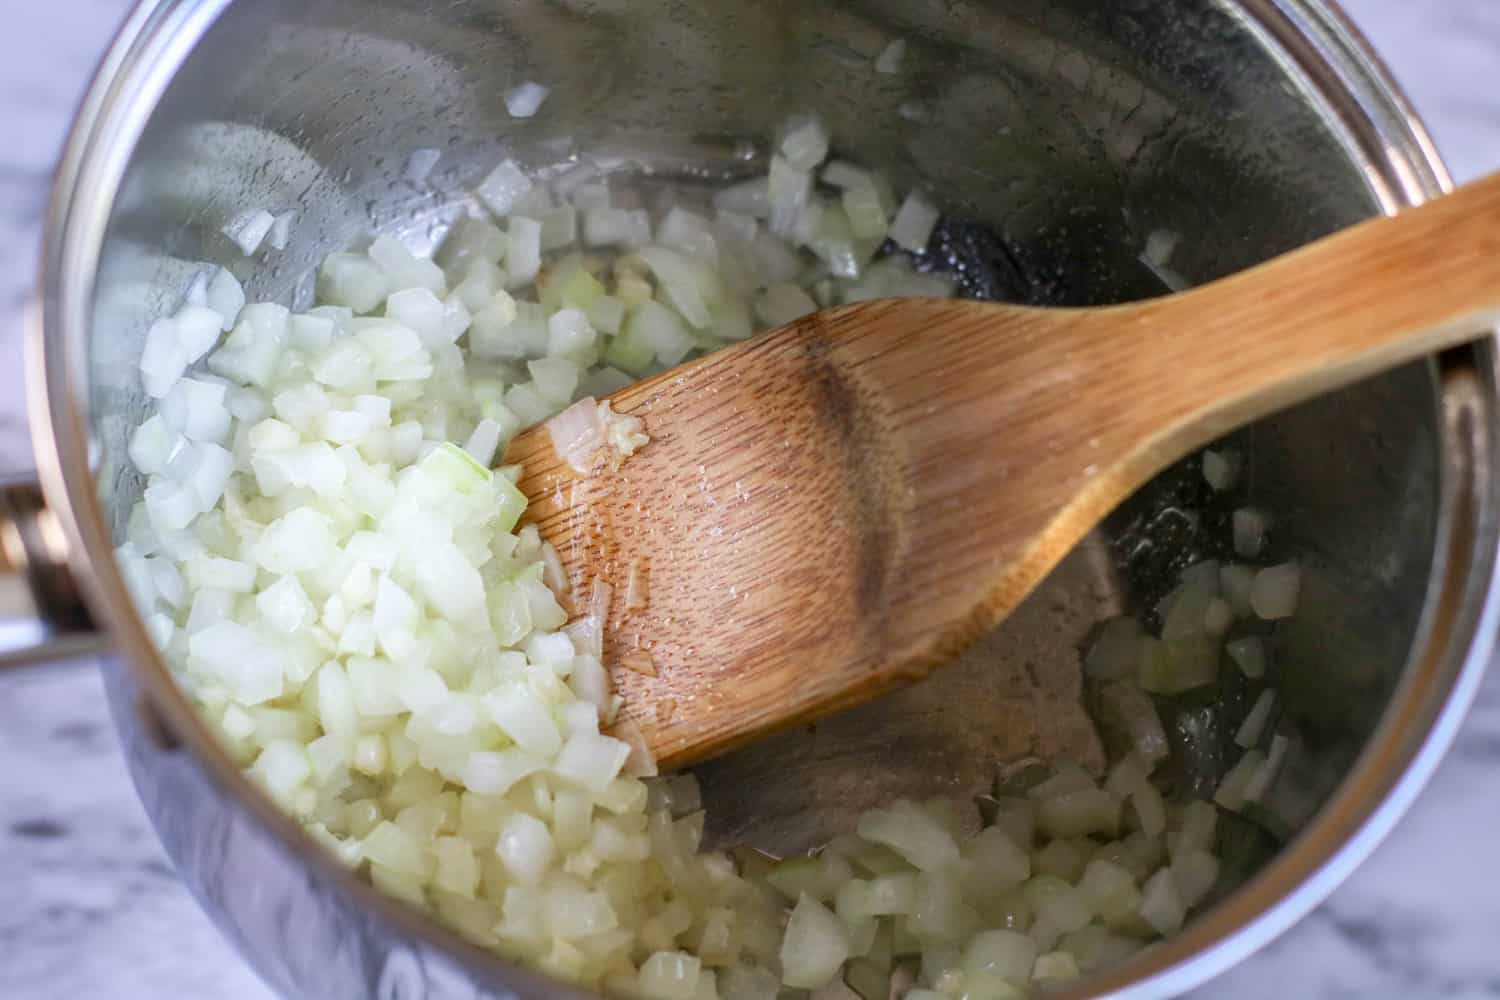 saute chopped onions in a stainless steel pot